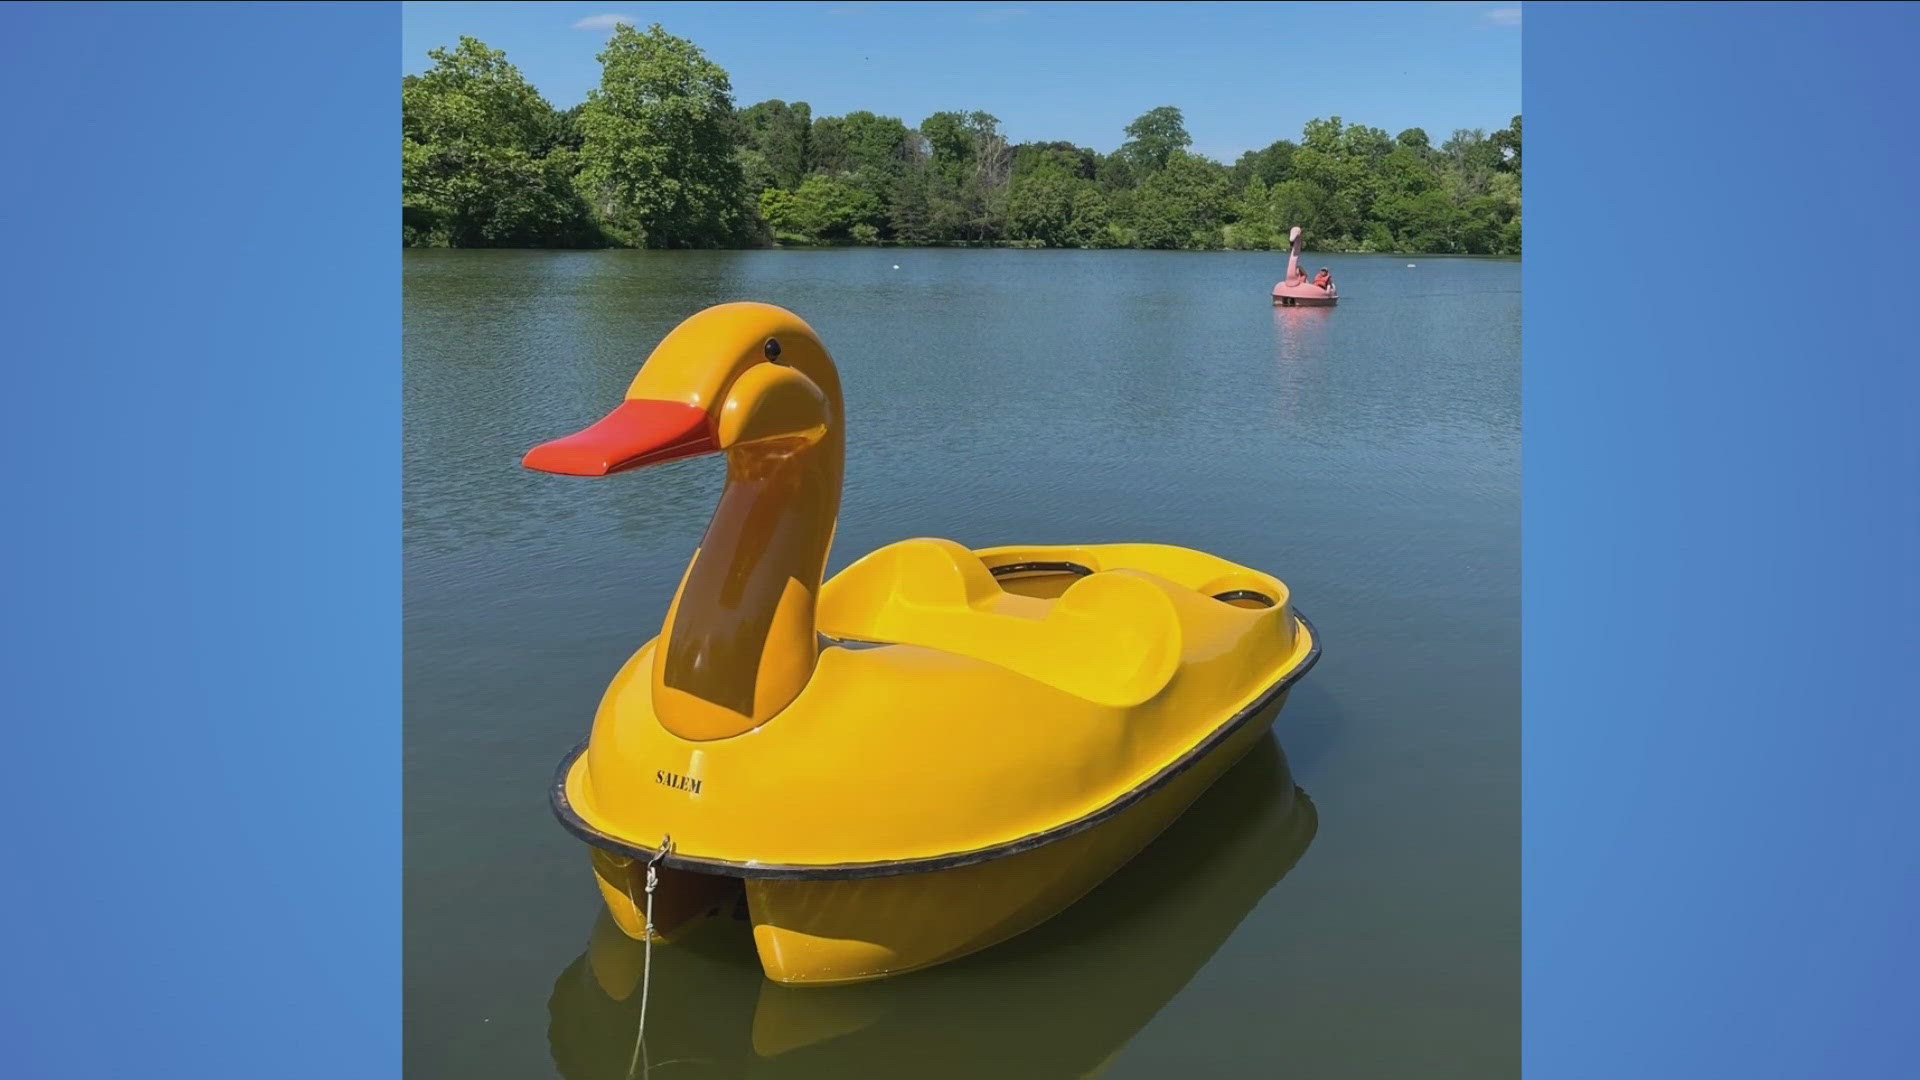 Ducky rides at Hoyt Lake for the summer